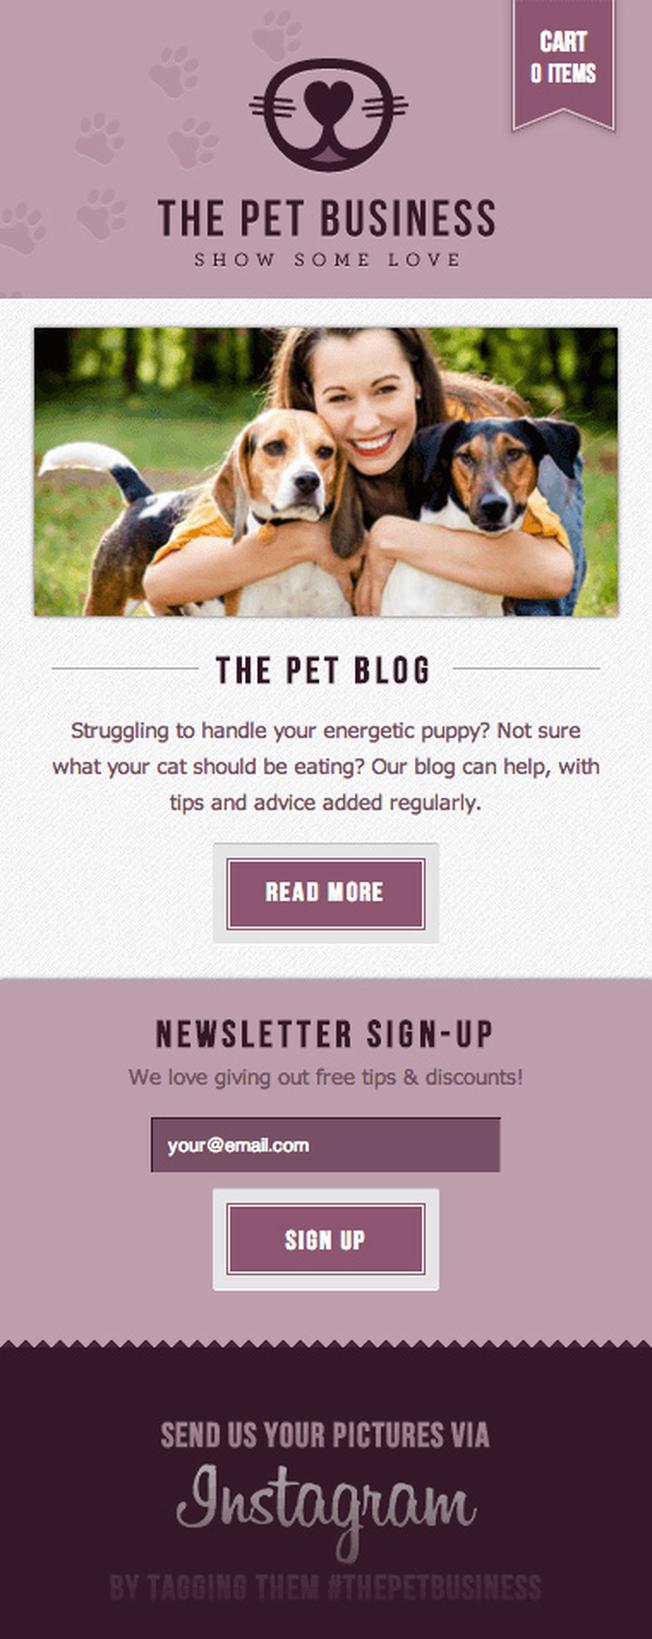 The Pet Business blog page mobile view.